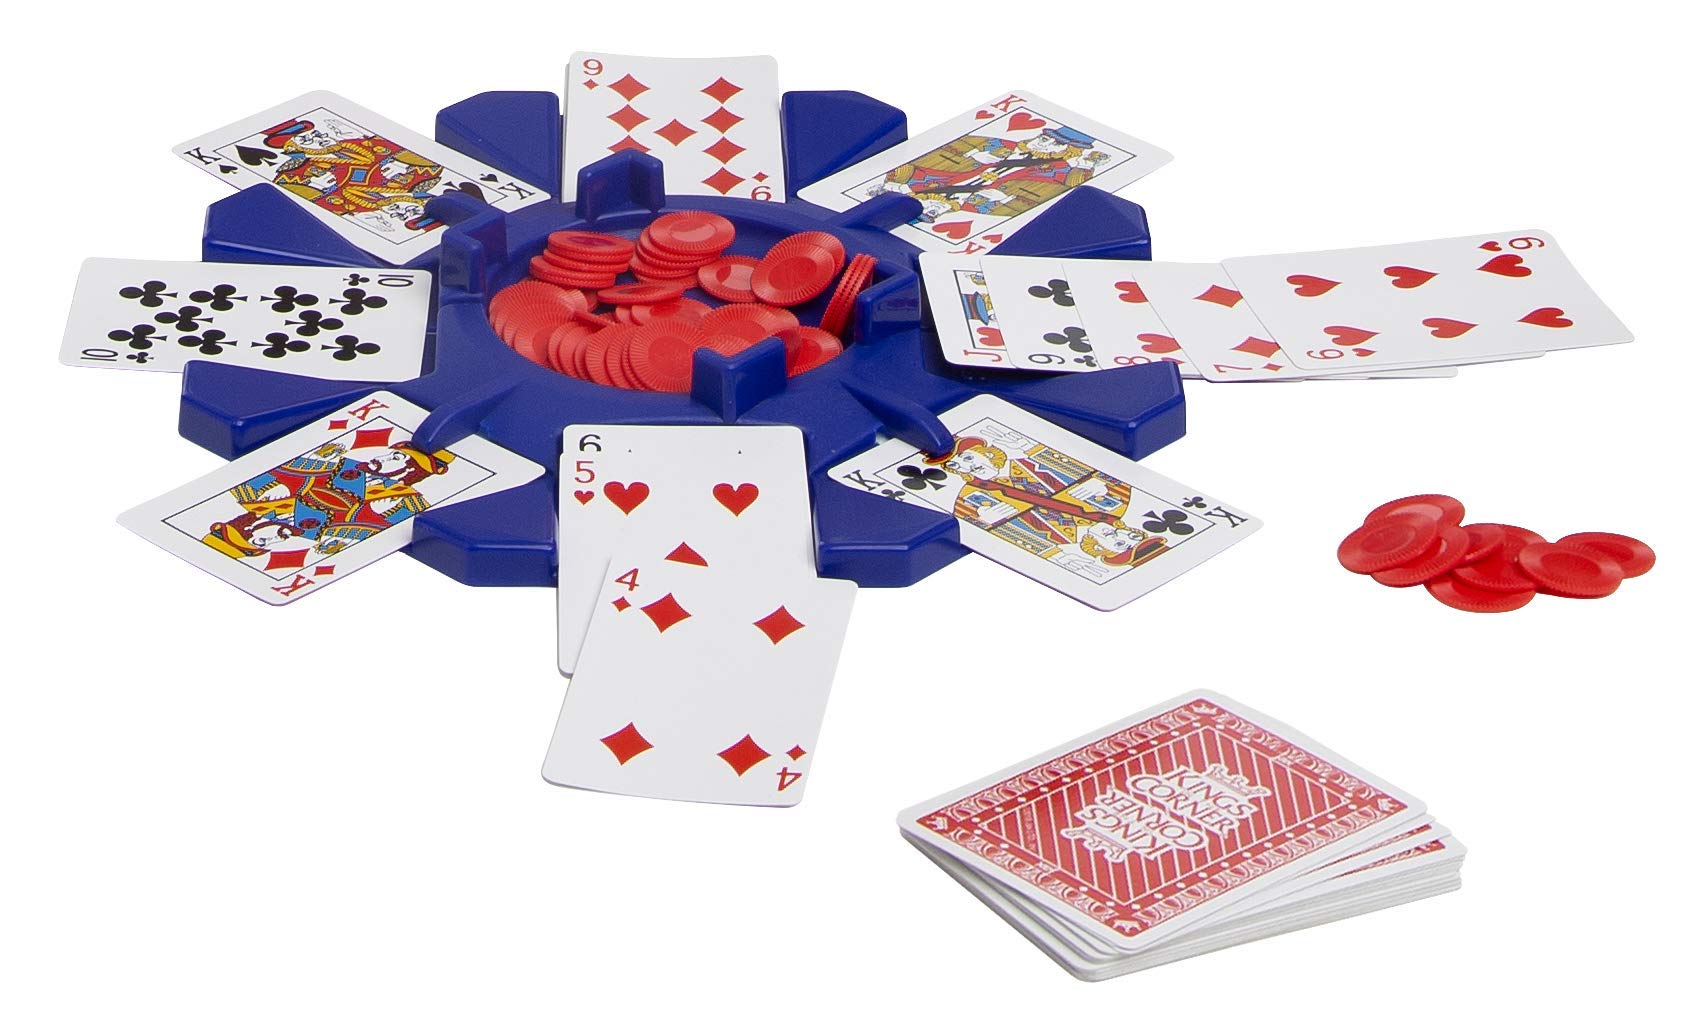 Kings in the Corner - The Traditional Gameplay of Solitaire with a Twist, for the Whole Family!